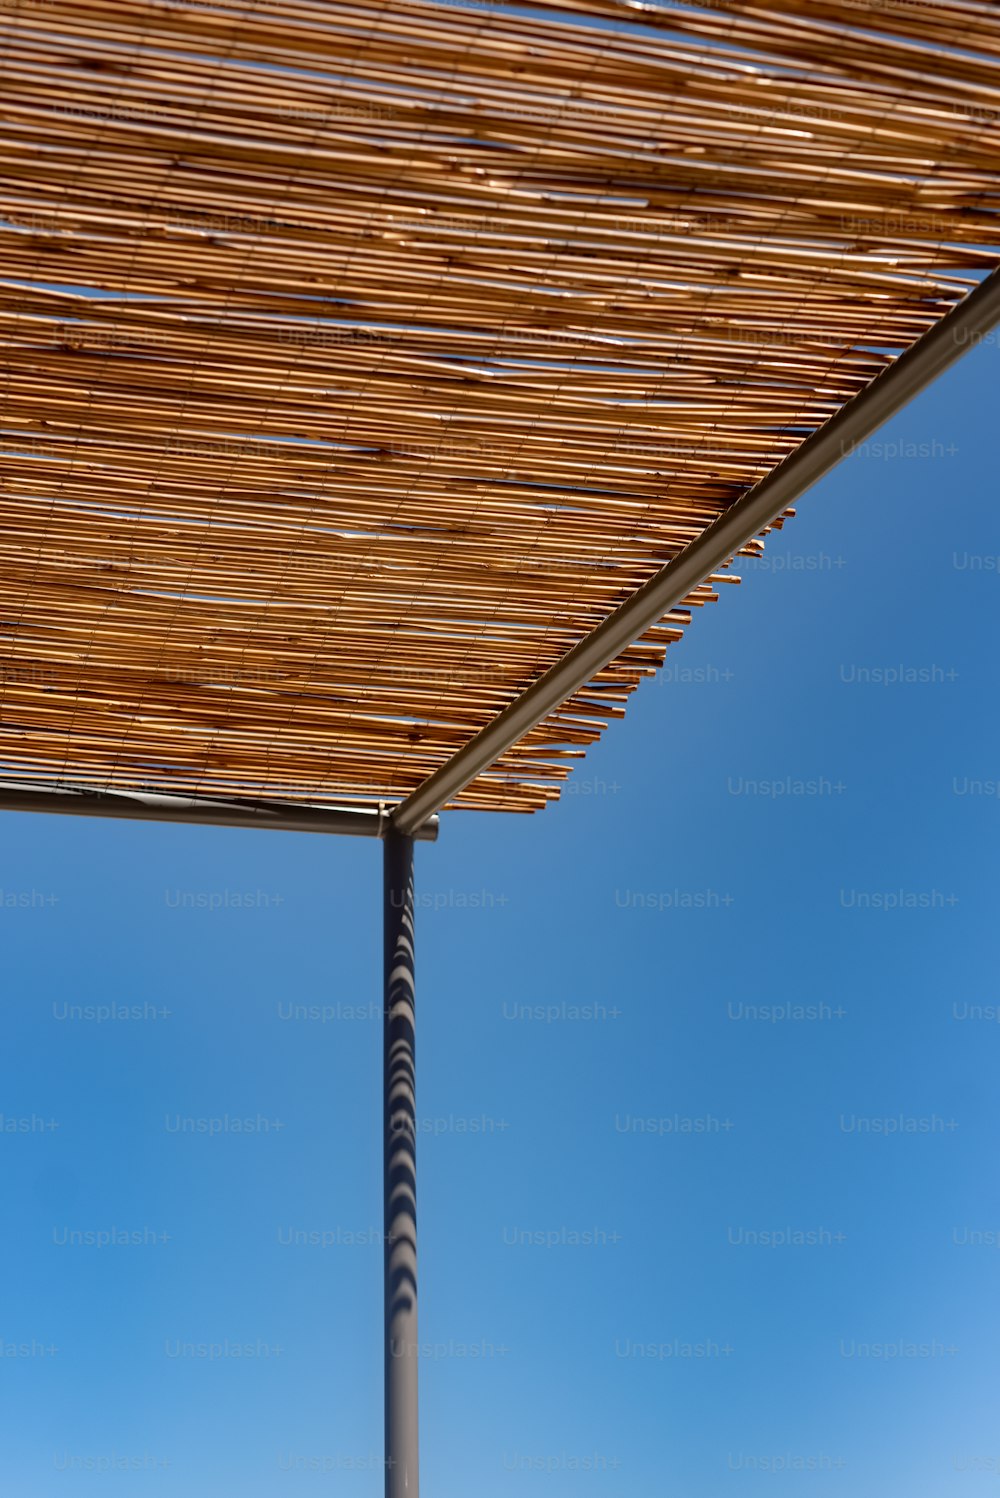 a close up of a wooden structure with a blue sky in the background